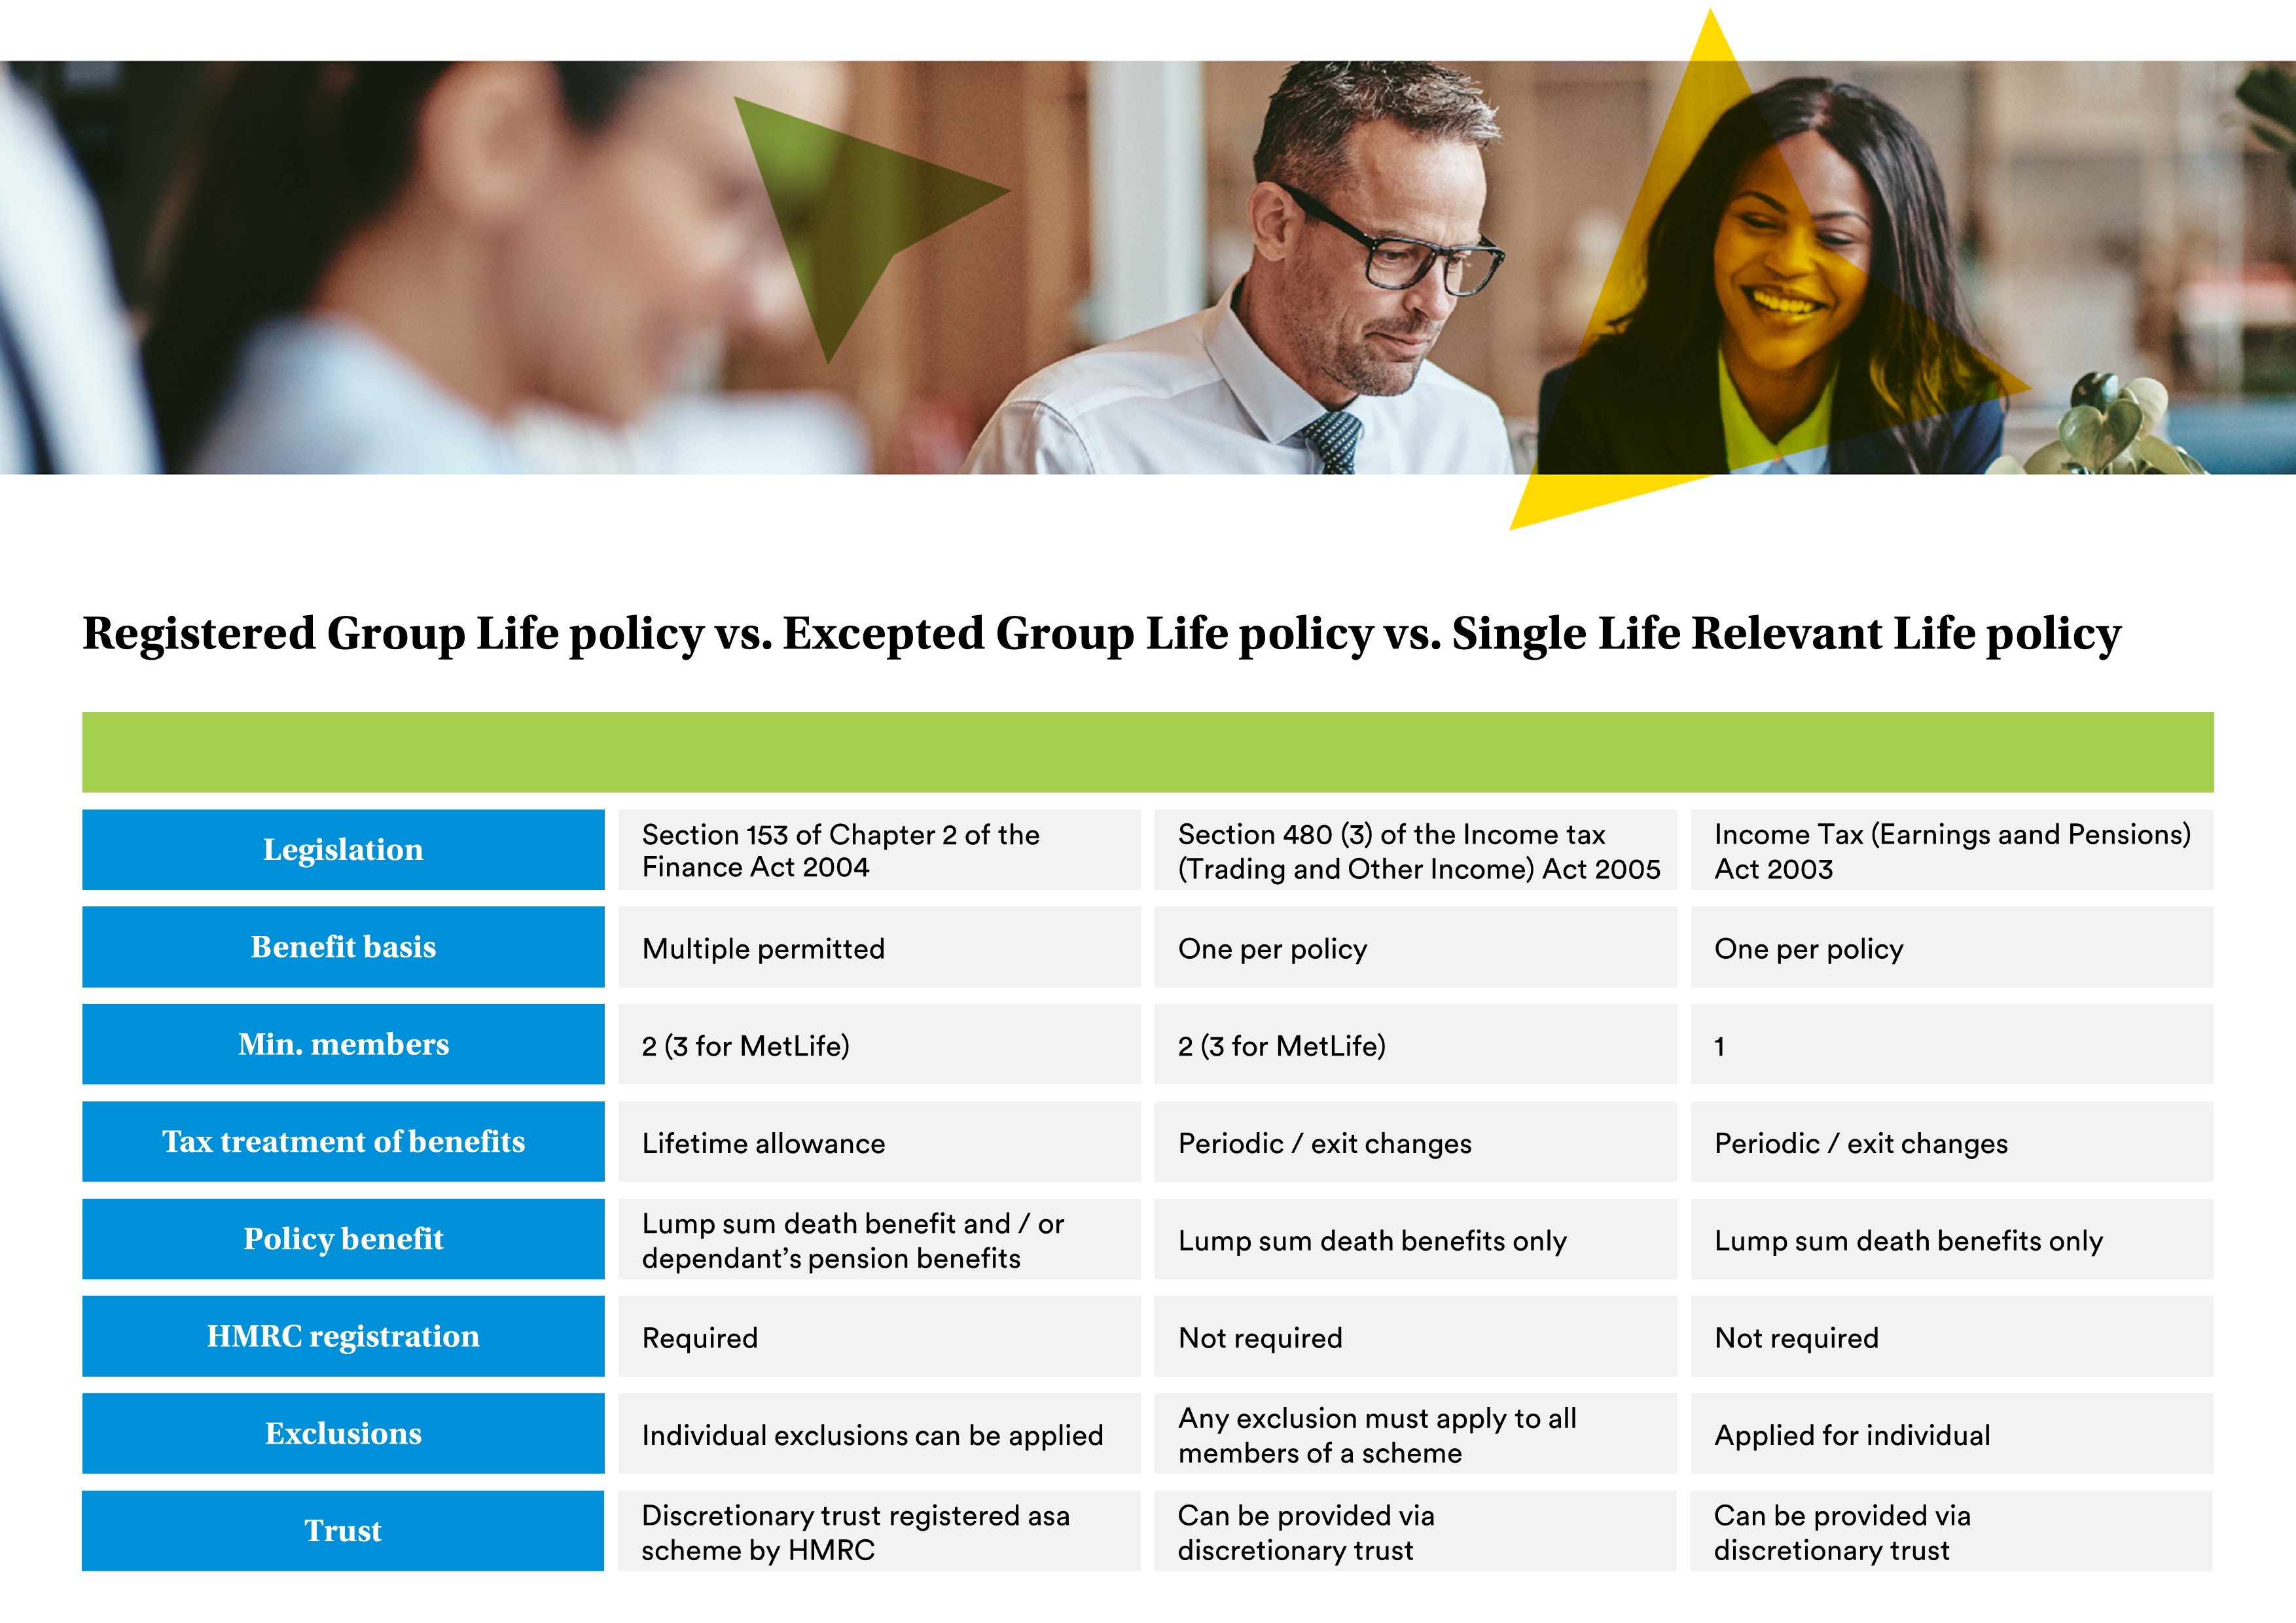 Registered Group Life policy vs. Excepted Group Life policy Vs. Single Life Relevant Life policy, including comparisons on legislation, benefit basis, minimum number of members, tax treatment of benefits, policy benefits, HMRC registration, exclusions and trusts.